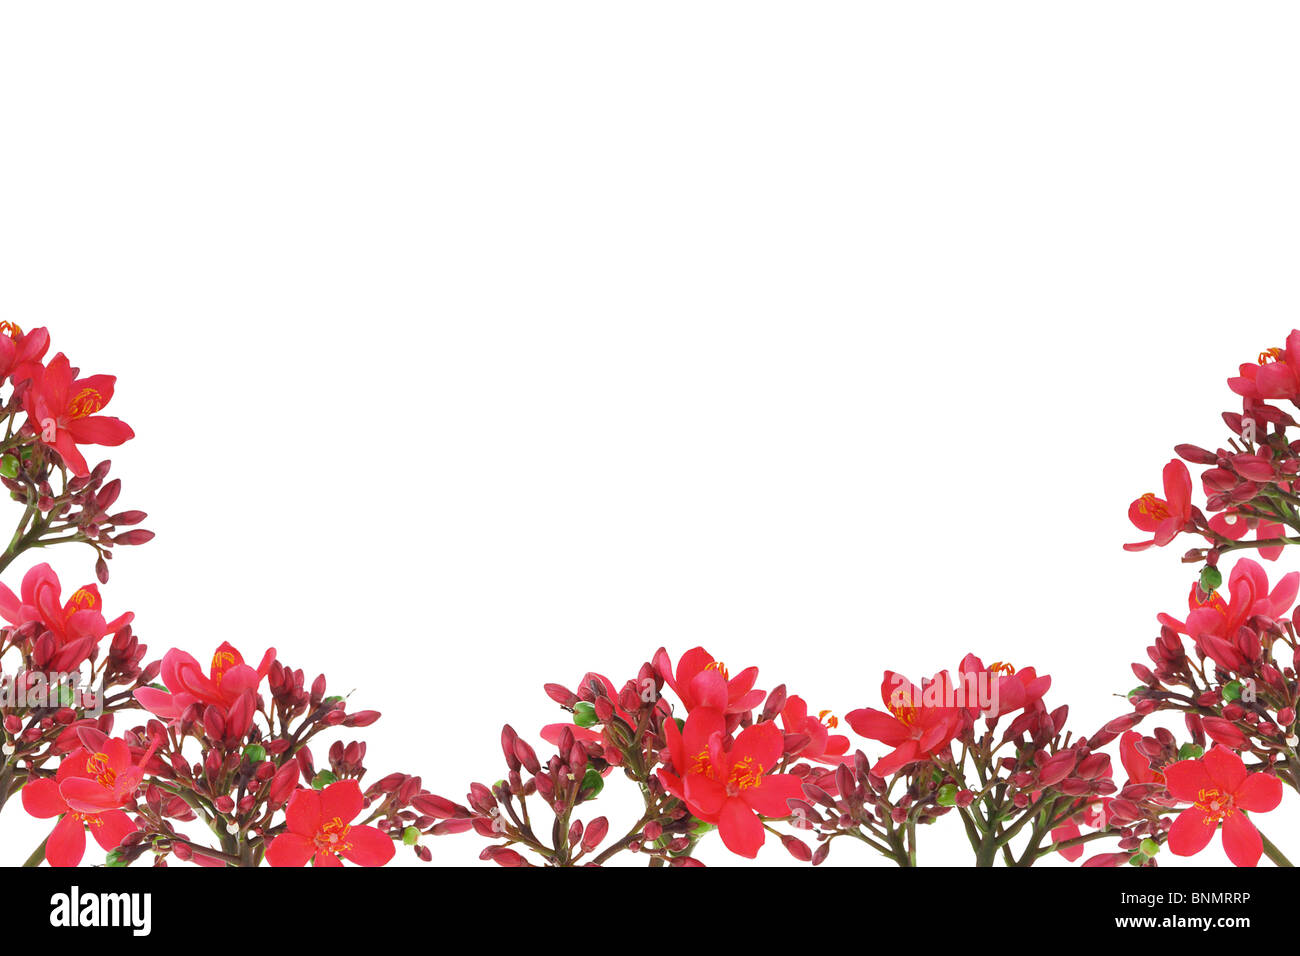 Red floral design border with copy space Stock Photo